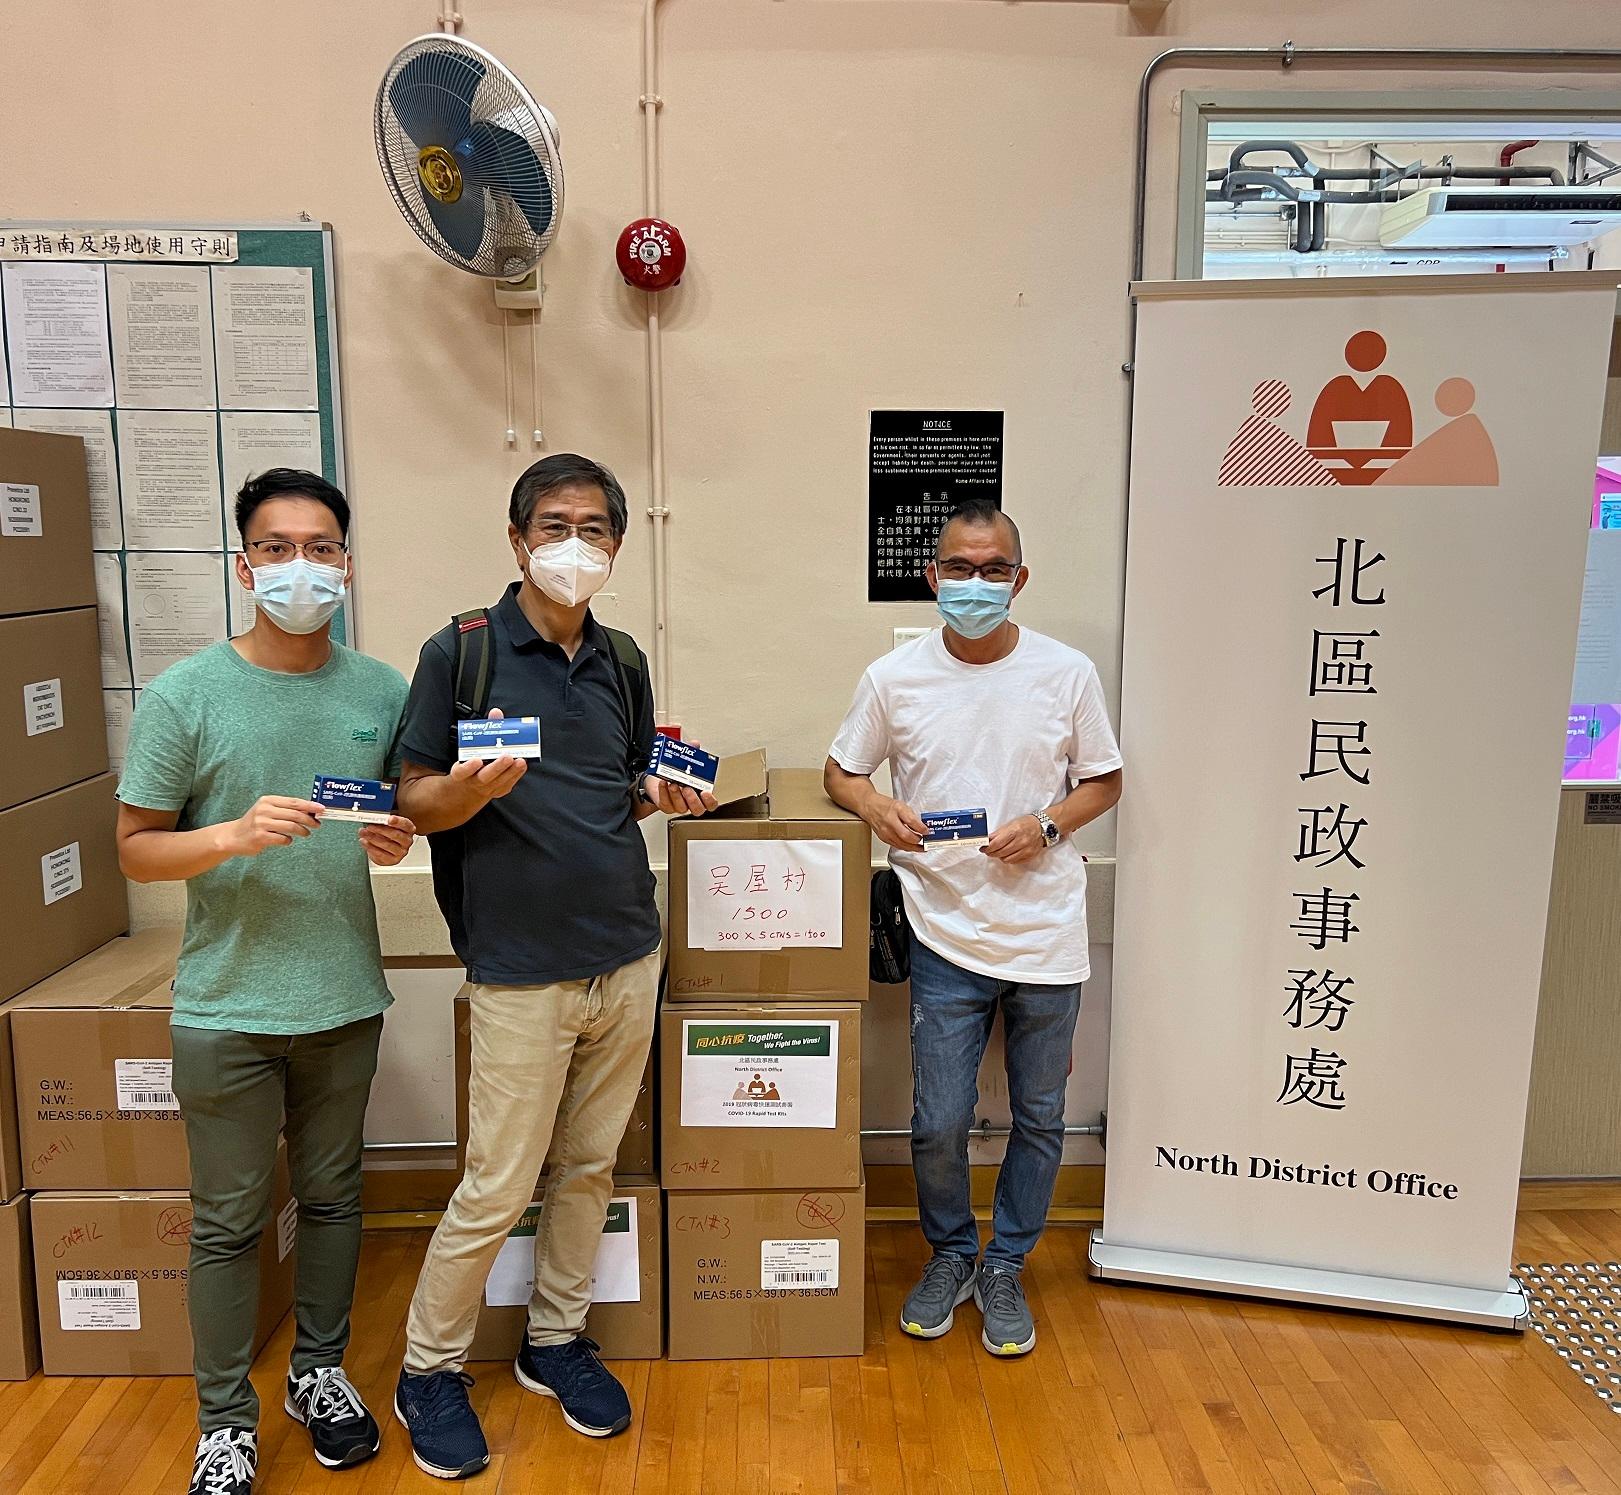 The North District Office today (June 17) distributed COVID-19 rapid test kits to households and cleansing workers living and working in Ng Uk Tsuen for voluntary testing through the Village Representatives.